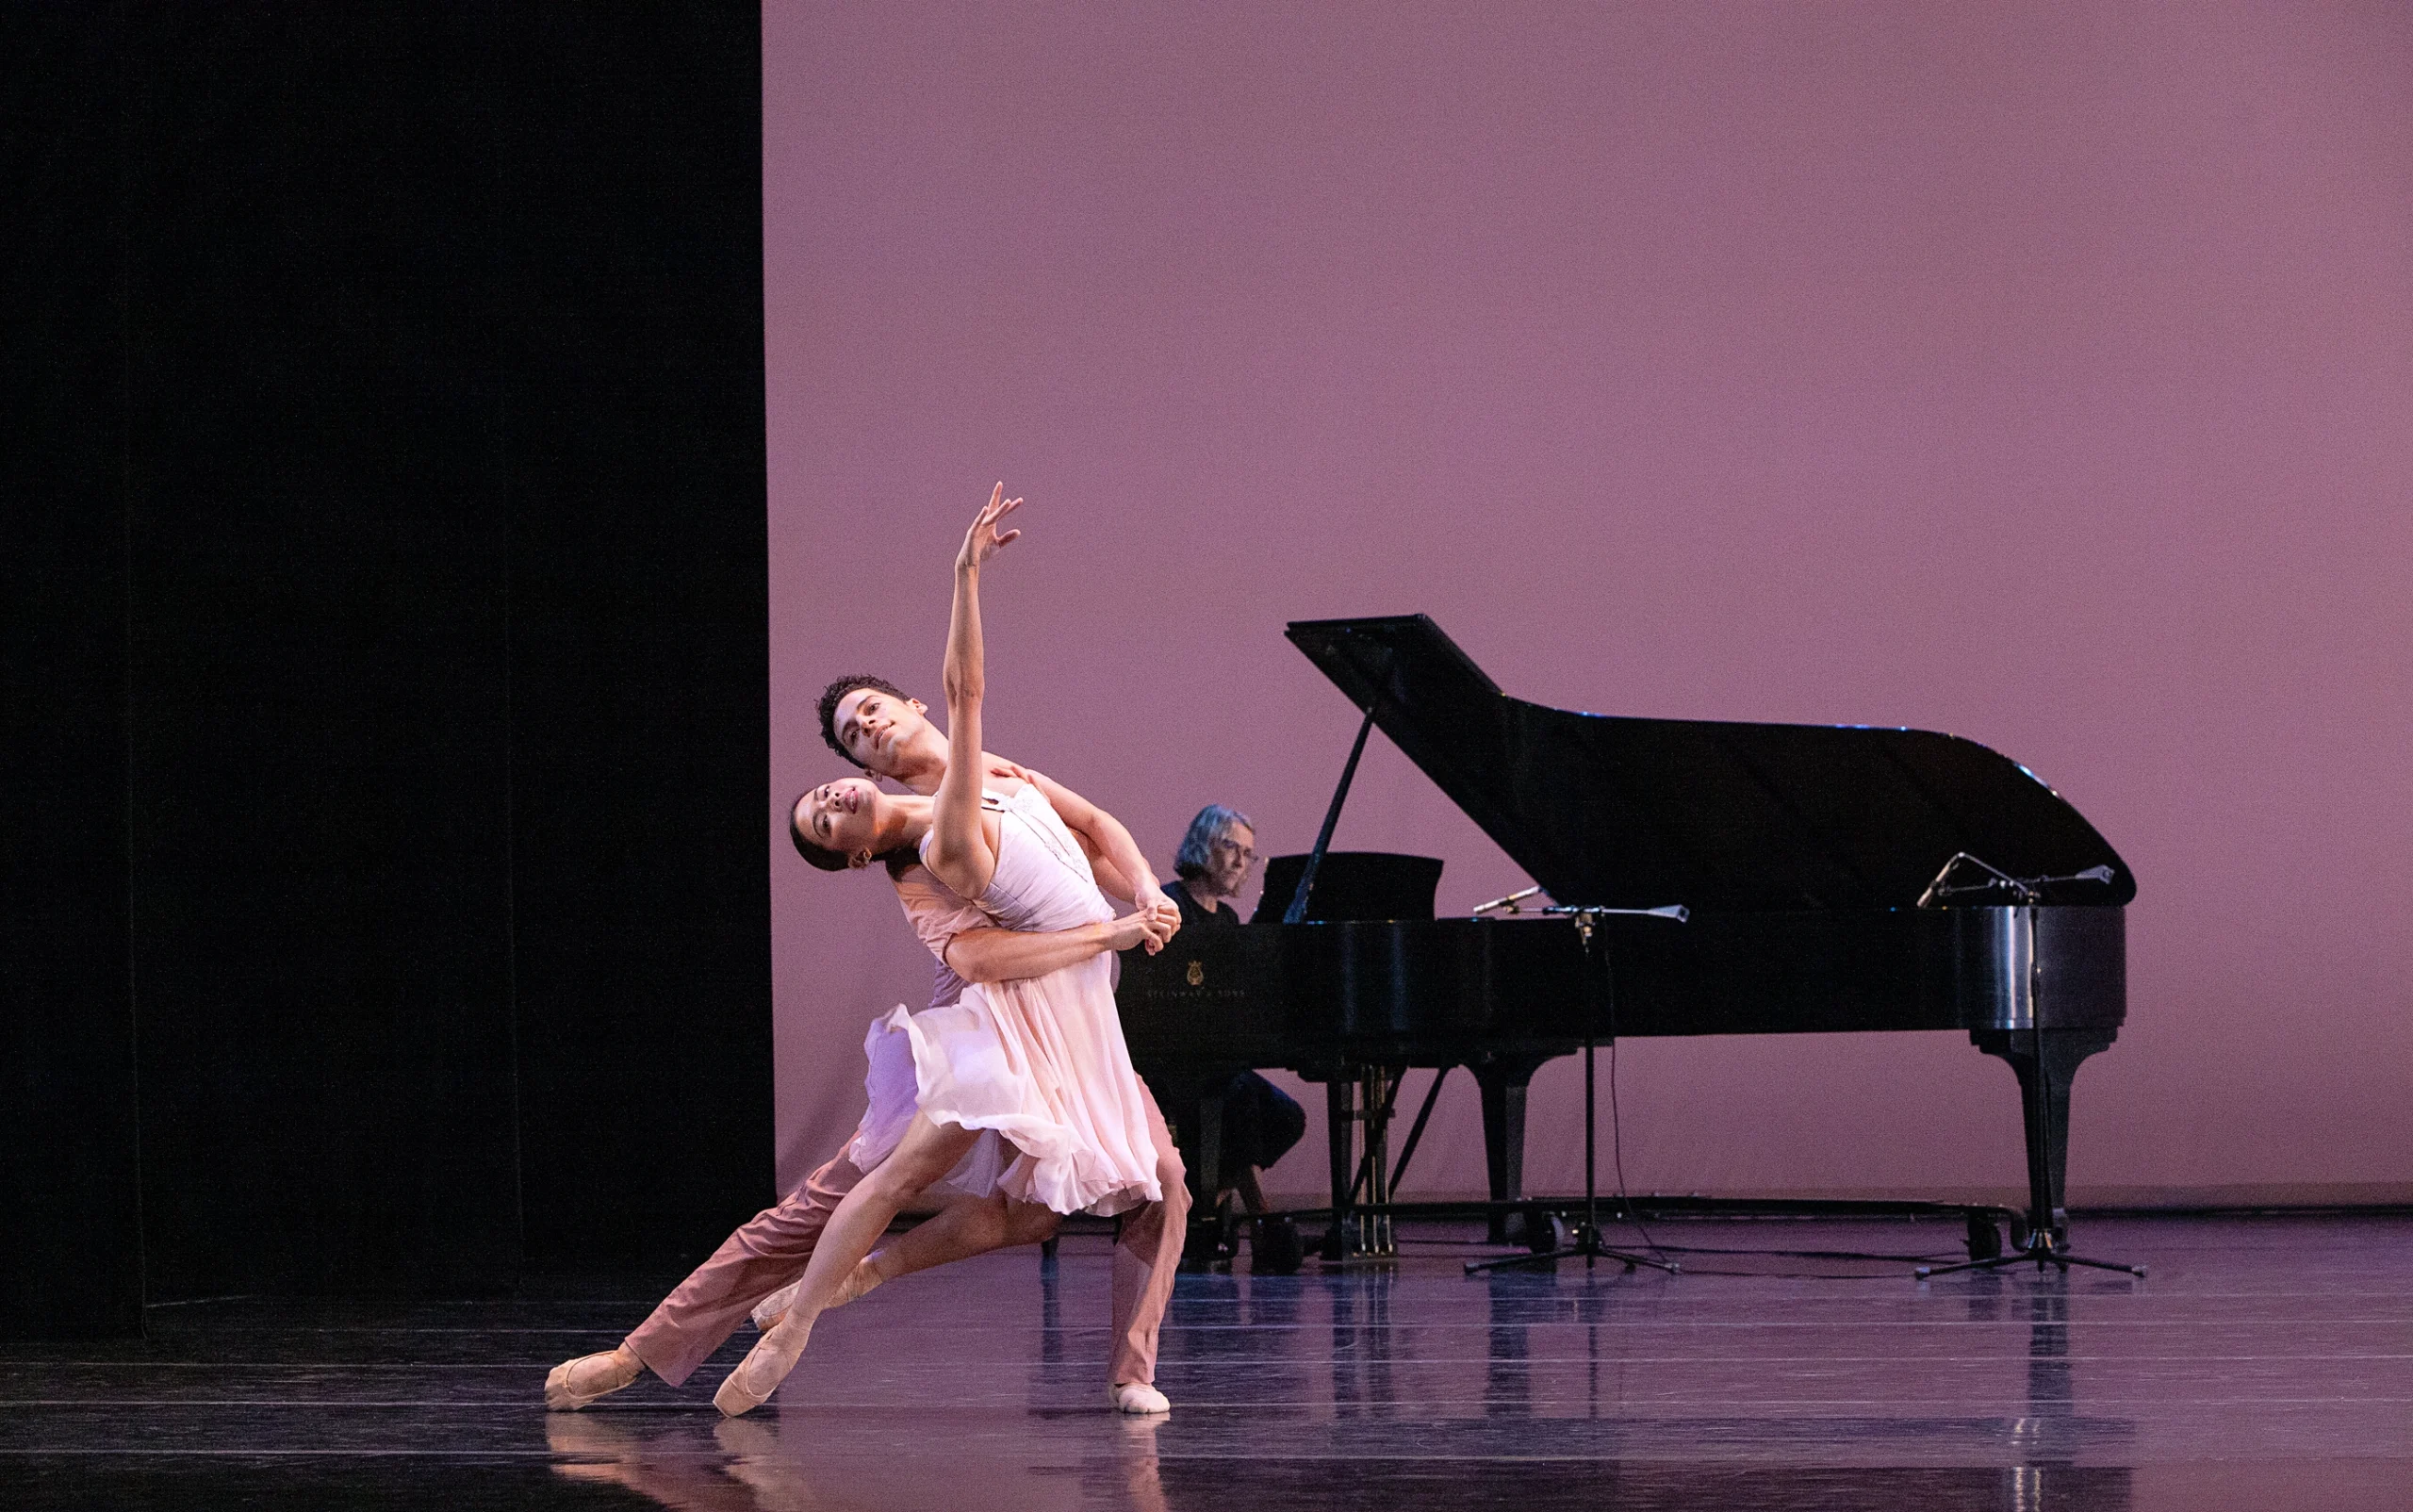 MIkaela Santos and Keaton Leier perform a sweeping pas de deux onstage. Leier, who wears mauve pants, lunges to his left, holding Santos around the waist. On pointe in a coupé back, Santos arches back and reaches her right arm up. She wears a oink chiffon dress. Behind them upstage, a woman plays a black grand piano.